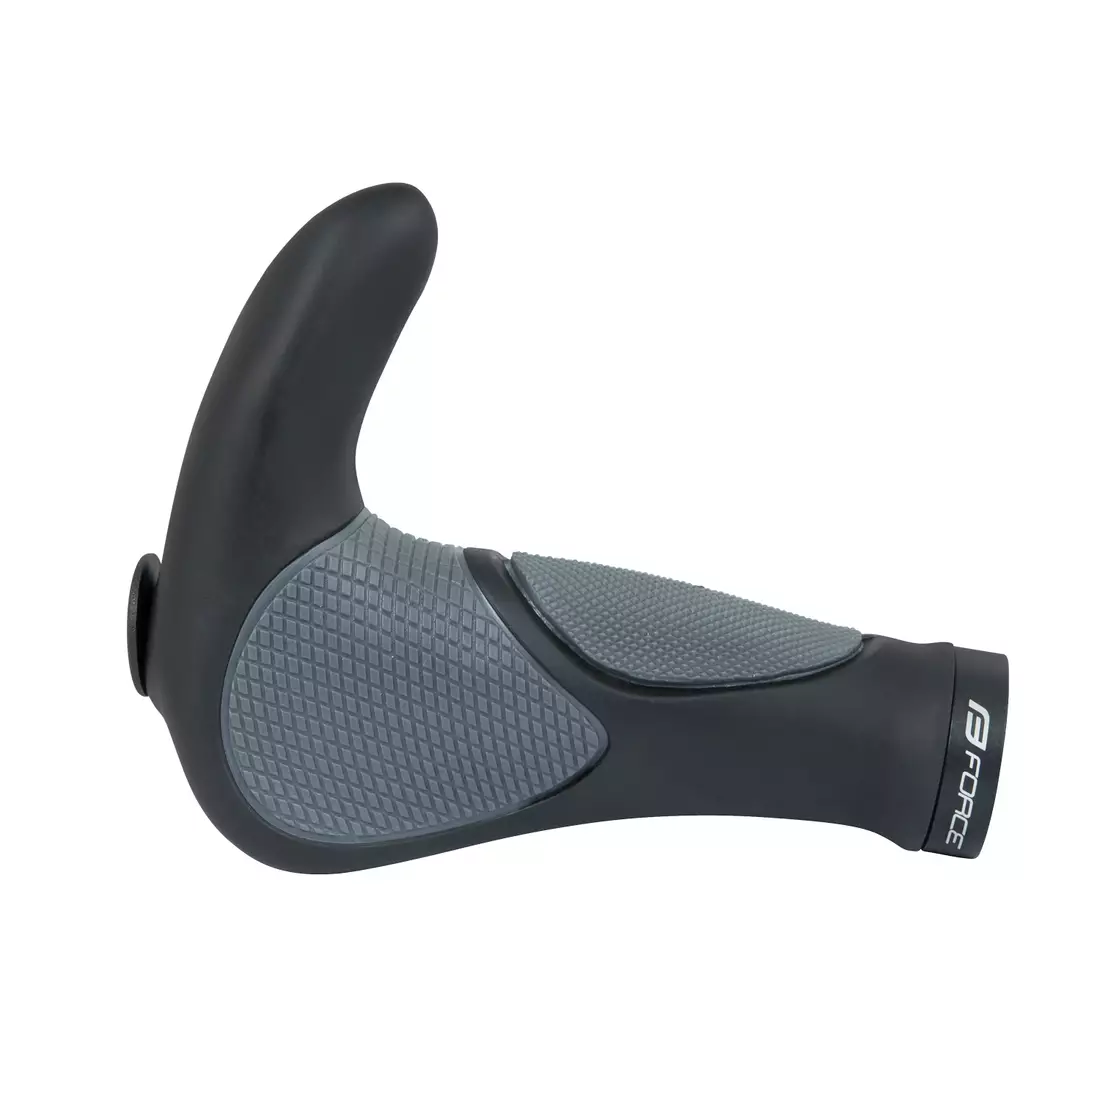 FORCE bicycle handlebar grips with bar ends GEL black 38216